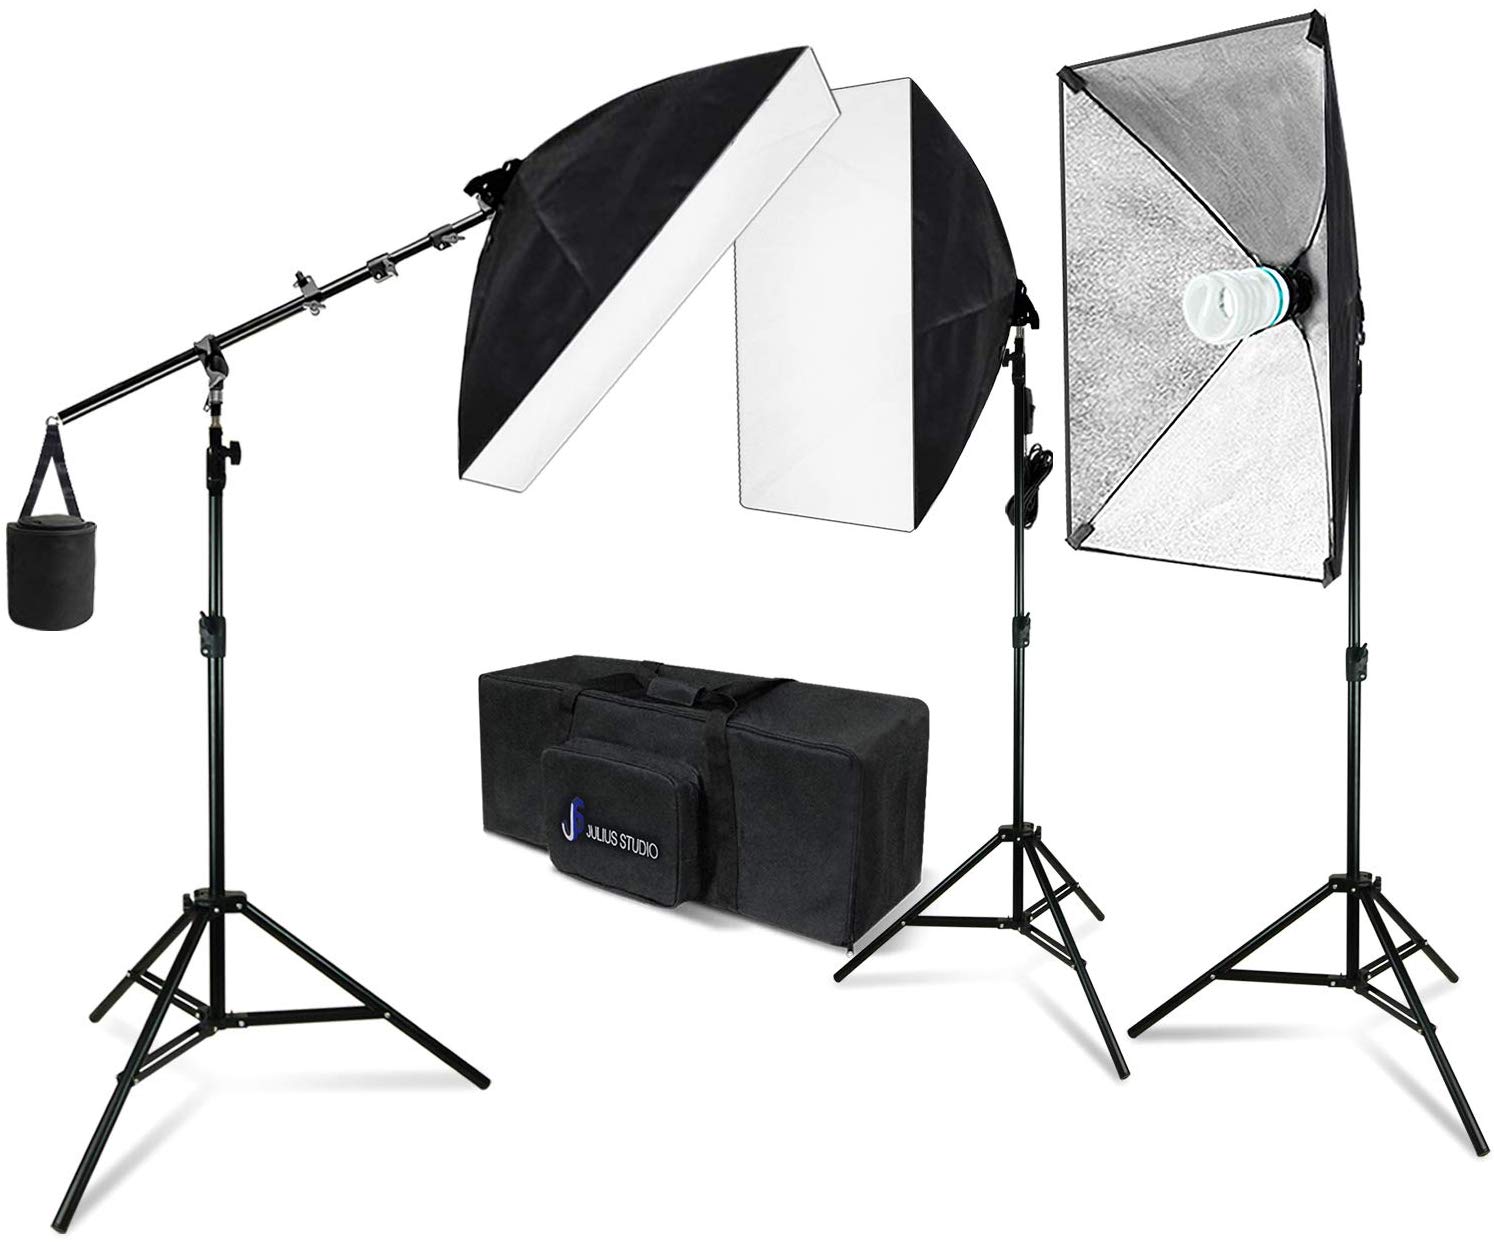 LS Photography 20 x 28 Inch Soft Box Lighting Kit with Bulb Socket, Boom Stand and Slope Arm Bar, 1200W Output Softbox Light for Video Camera Photography, Photo Portrait Studio, WMT1189 - image 1 of 7